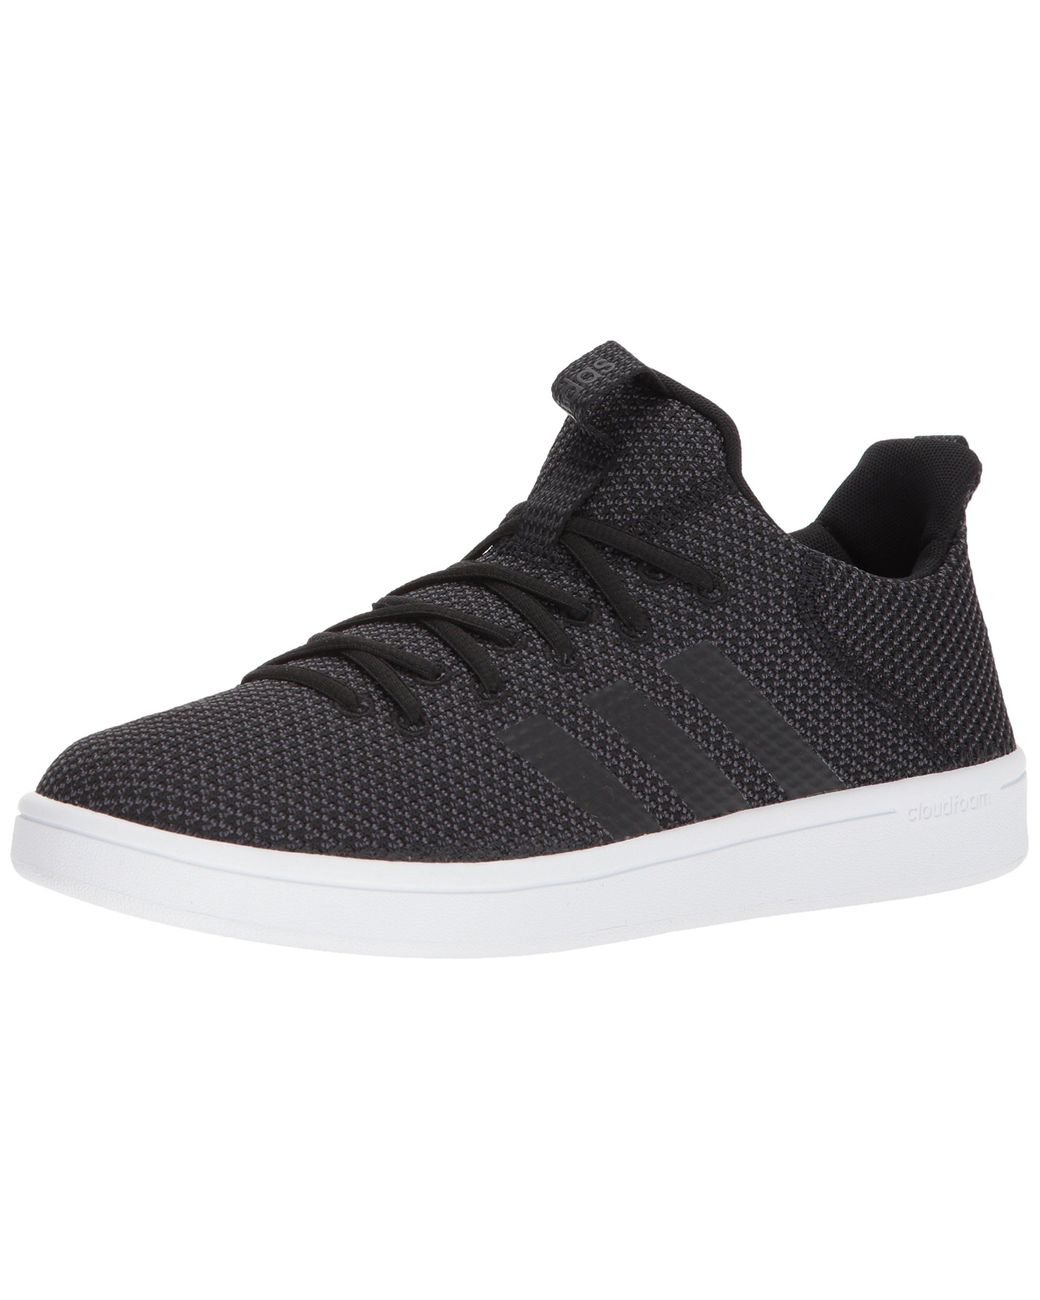 adidas Rubber Court Adapt Shoes in Black/Black/Grey (Black) for Men - Save  72% - Lyst